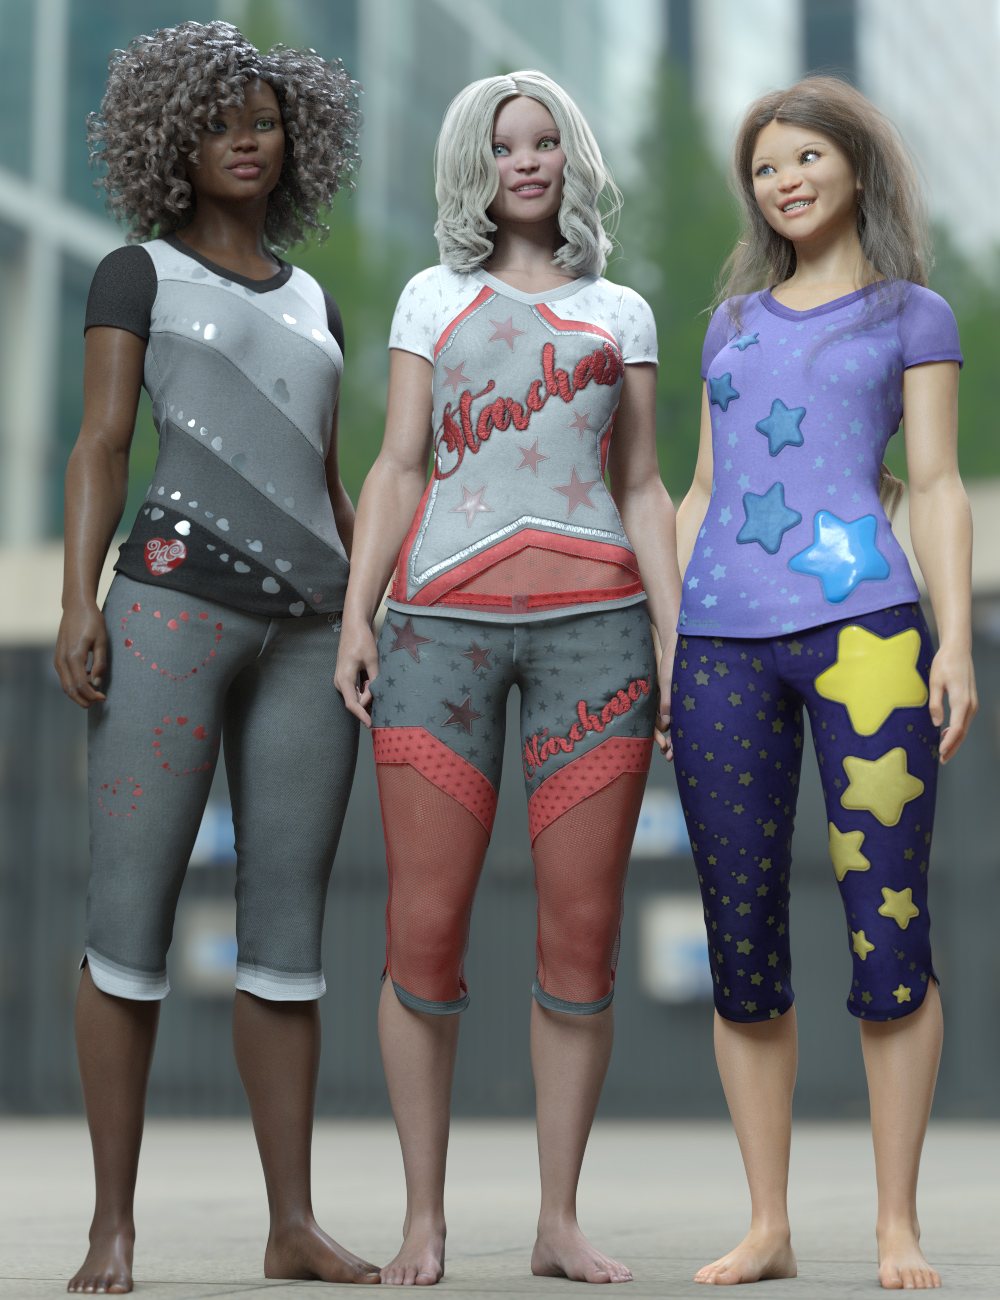 Playful Styles for Everyday 2 Clothes and Poses Texture Add-on by: Aeon Soul, 3D Models by Daz 3D